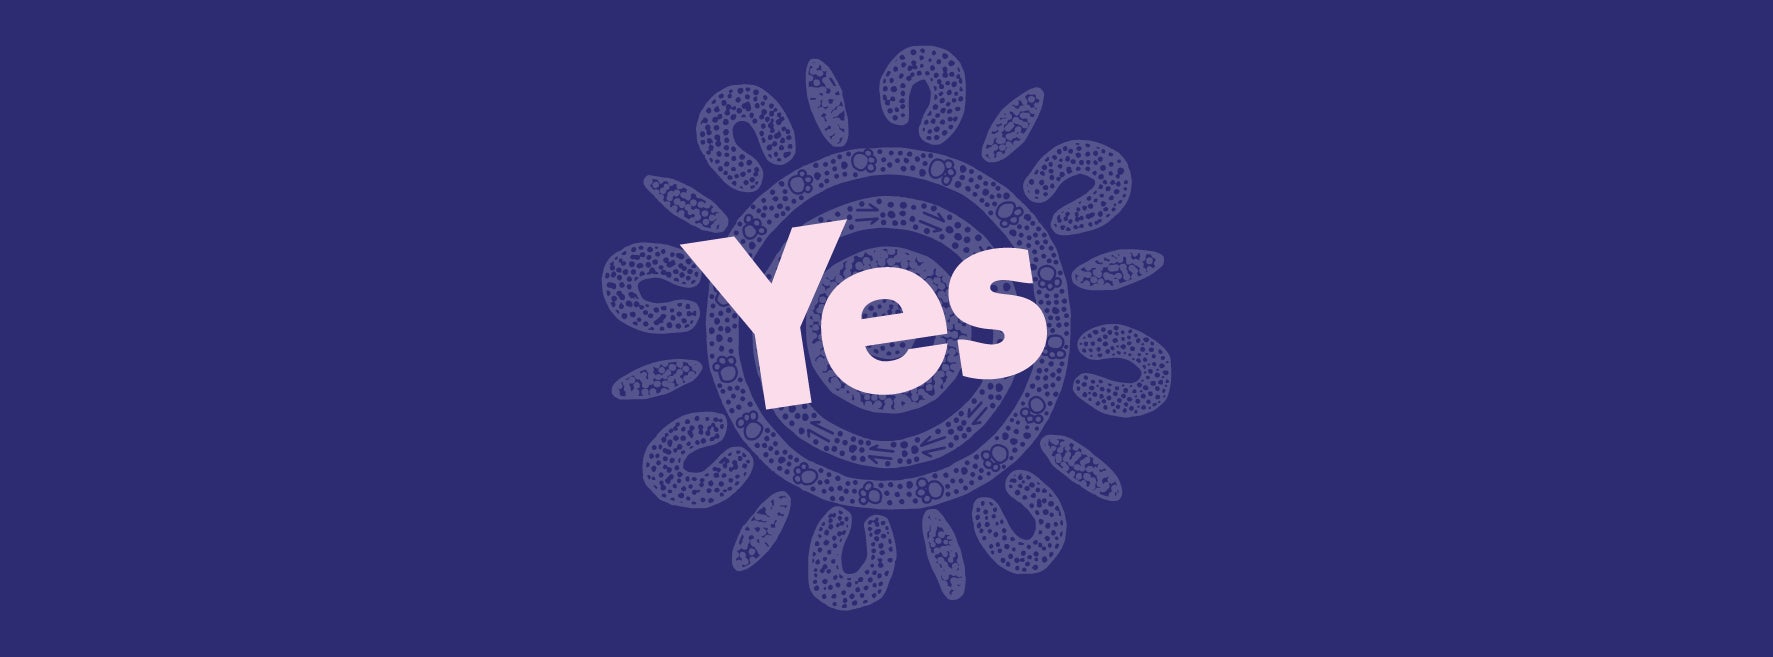 Yes to Voice to Parliament